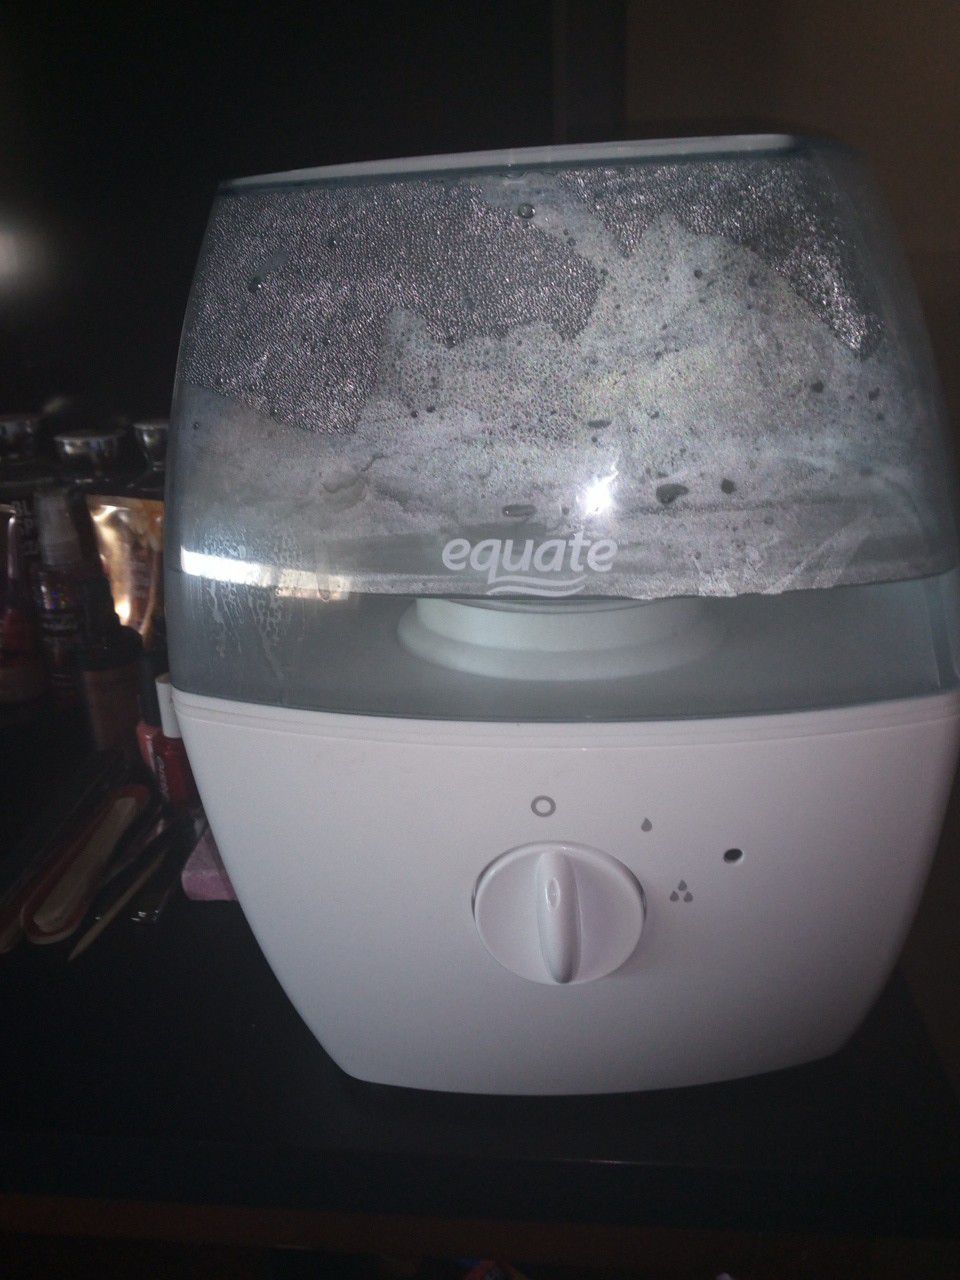 Equate Humidifier